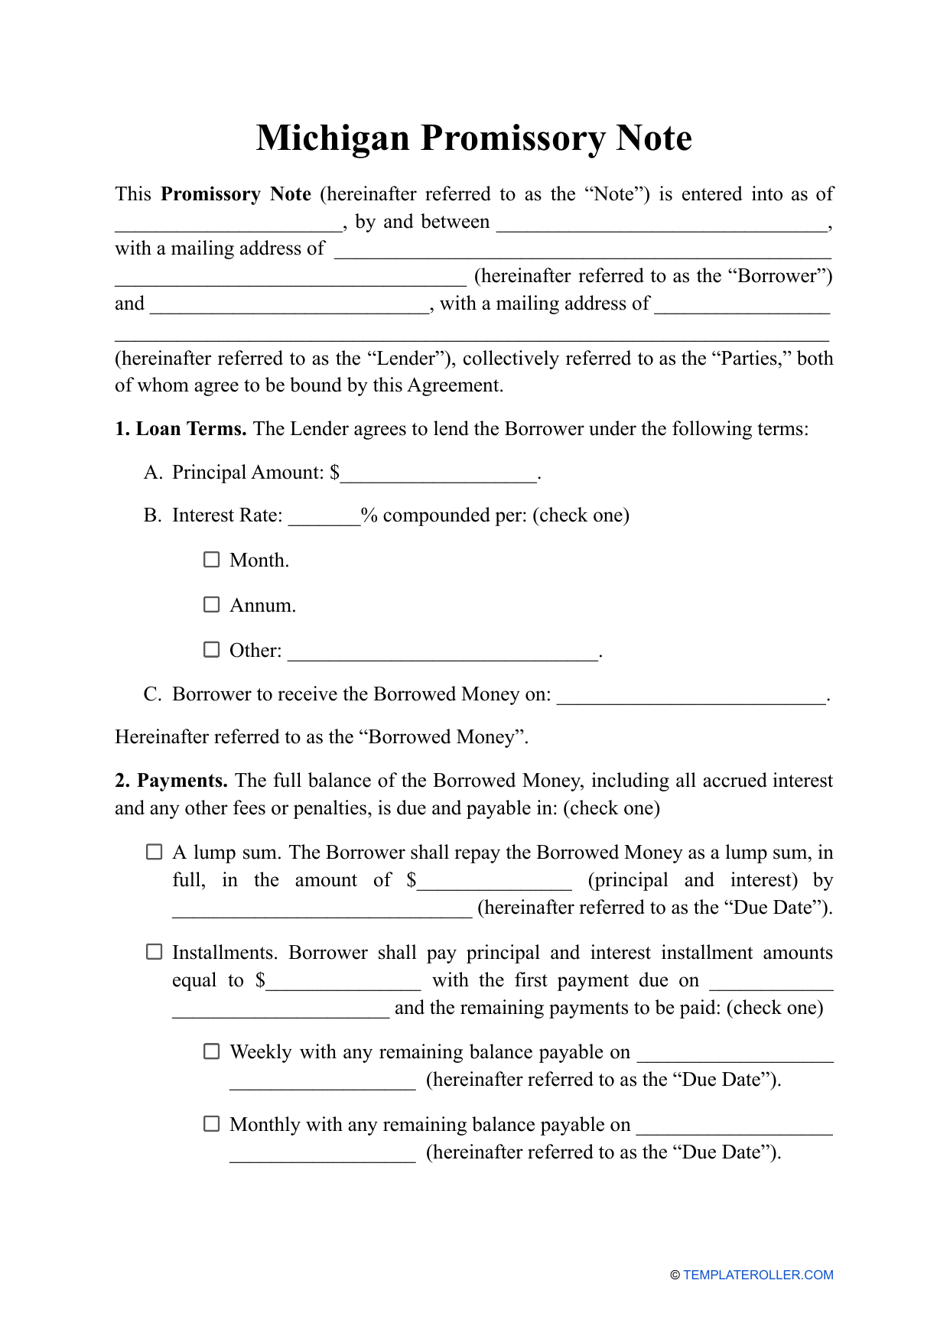 Michigan Promissory Note Template Fill Out Sign Online and Download